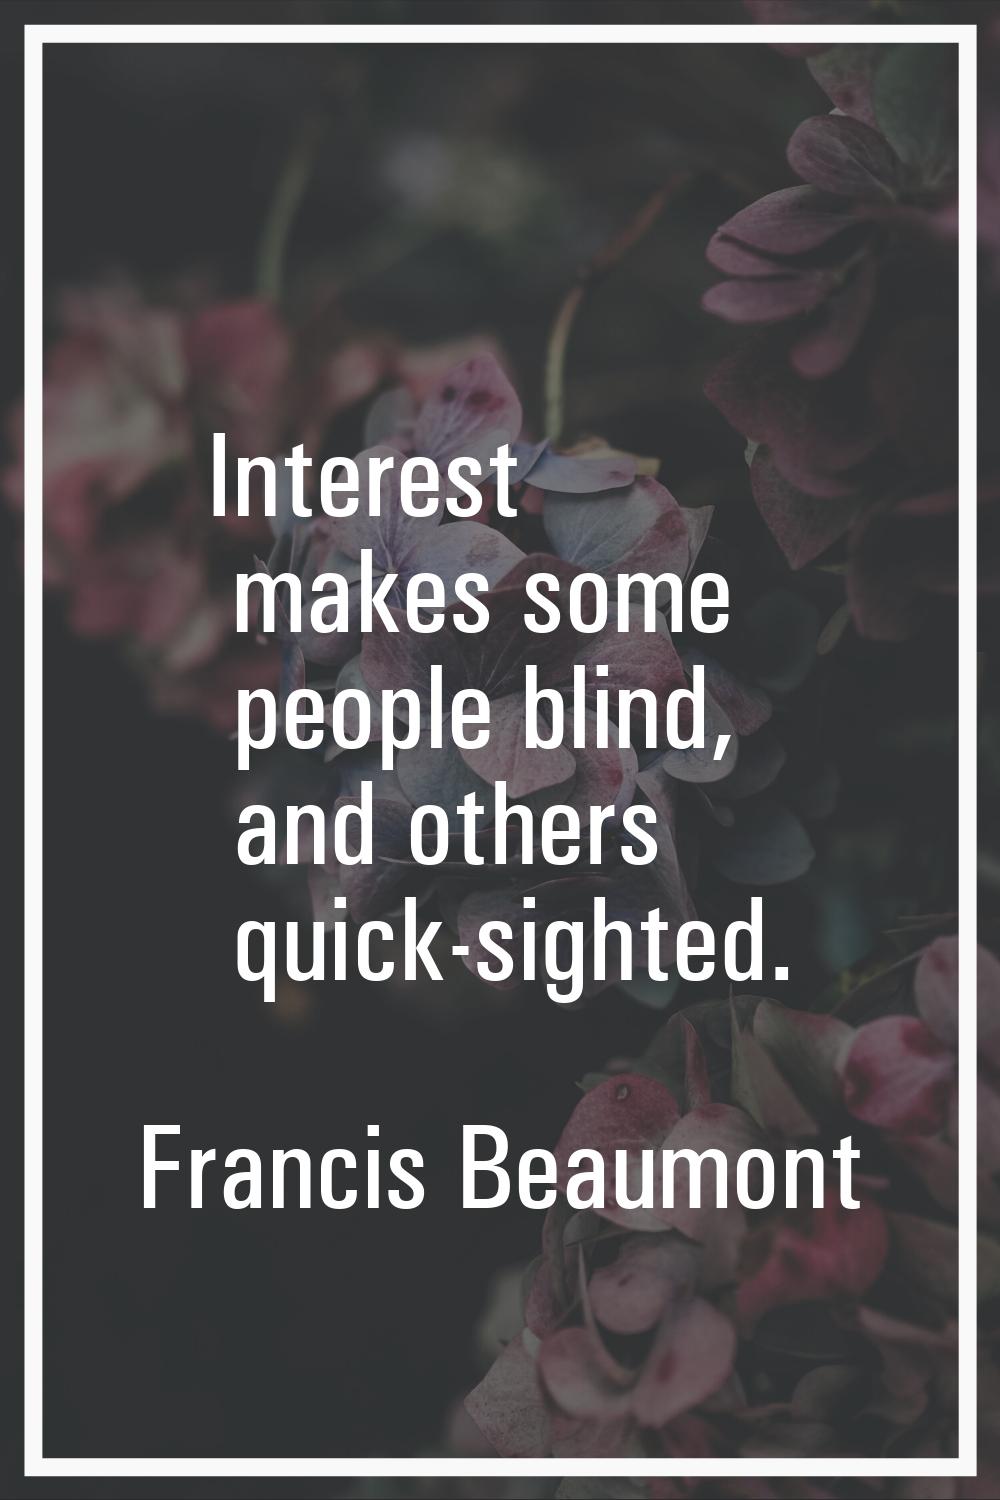 Interest makes some people blind, and others quick-sighted.